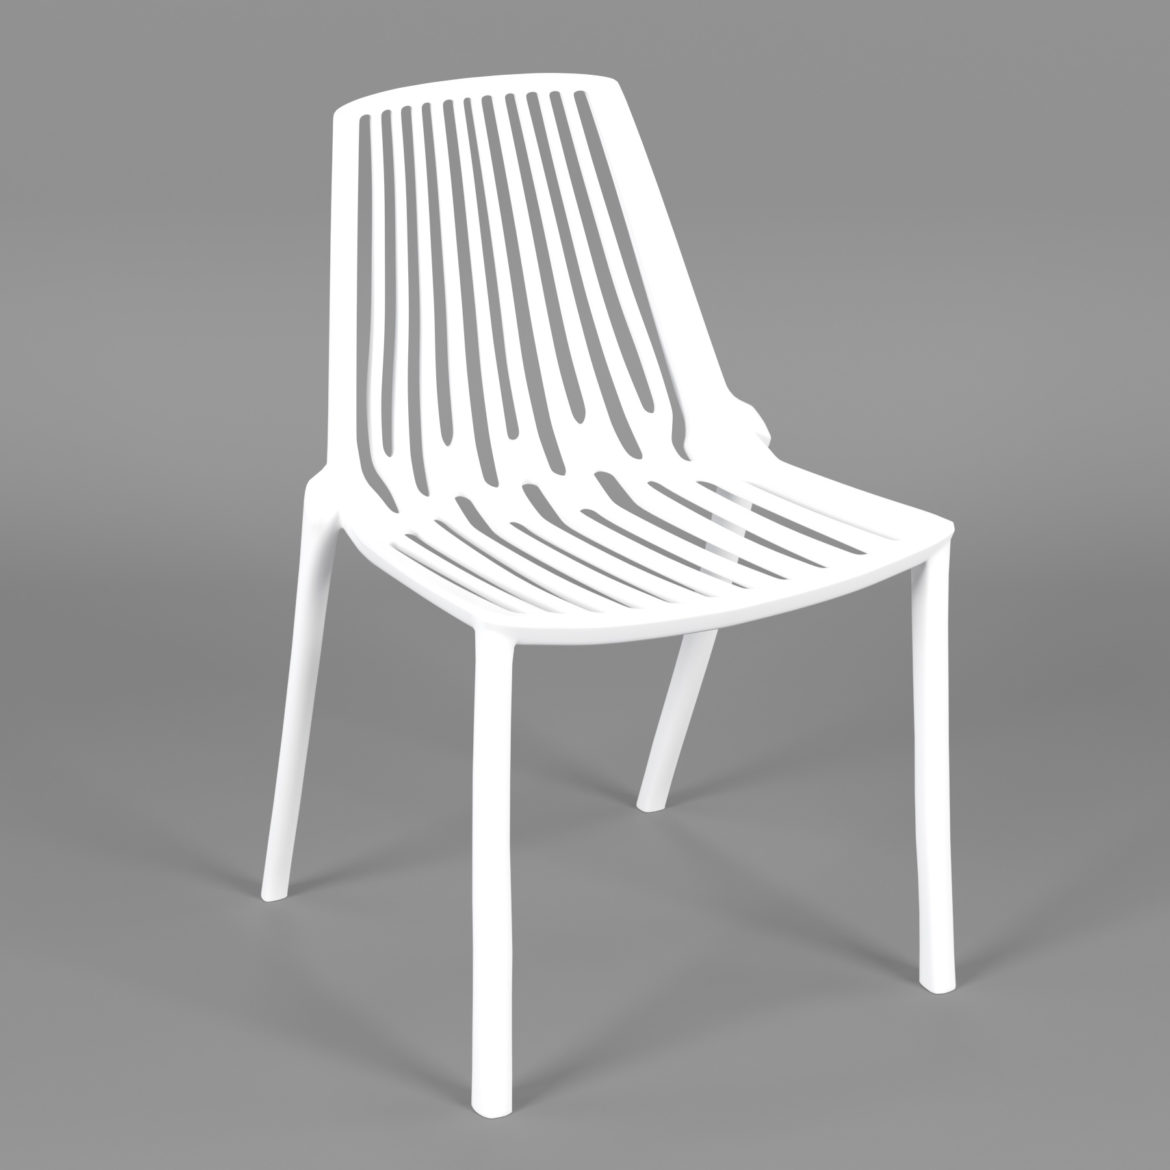  <a class="continue" href="https://www.flatpyramid.com/3d-models/furniture-3d-models/home-office-furniture/chair/white-dining-chair-with-holes/">Continue Reading<span> White Dining Chair With Holes</span></a>